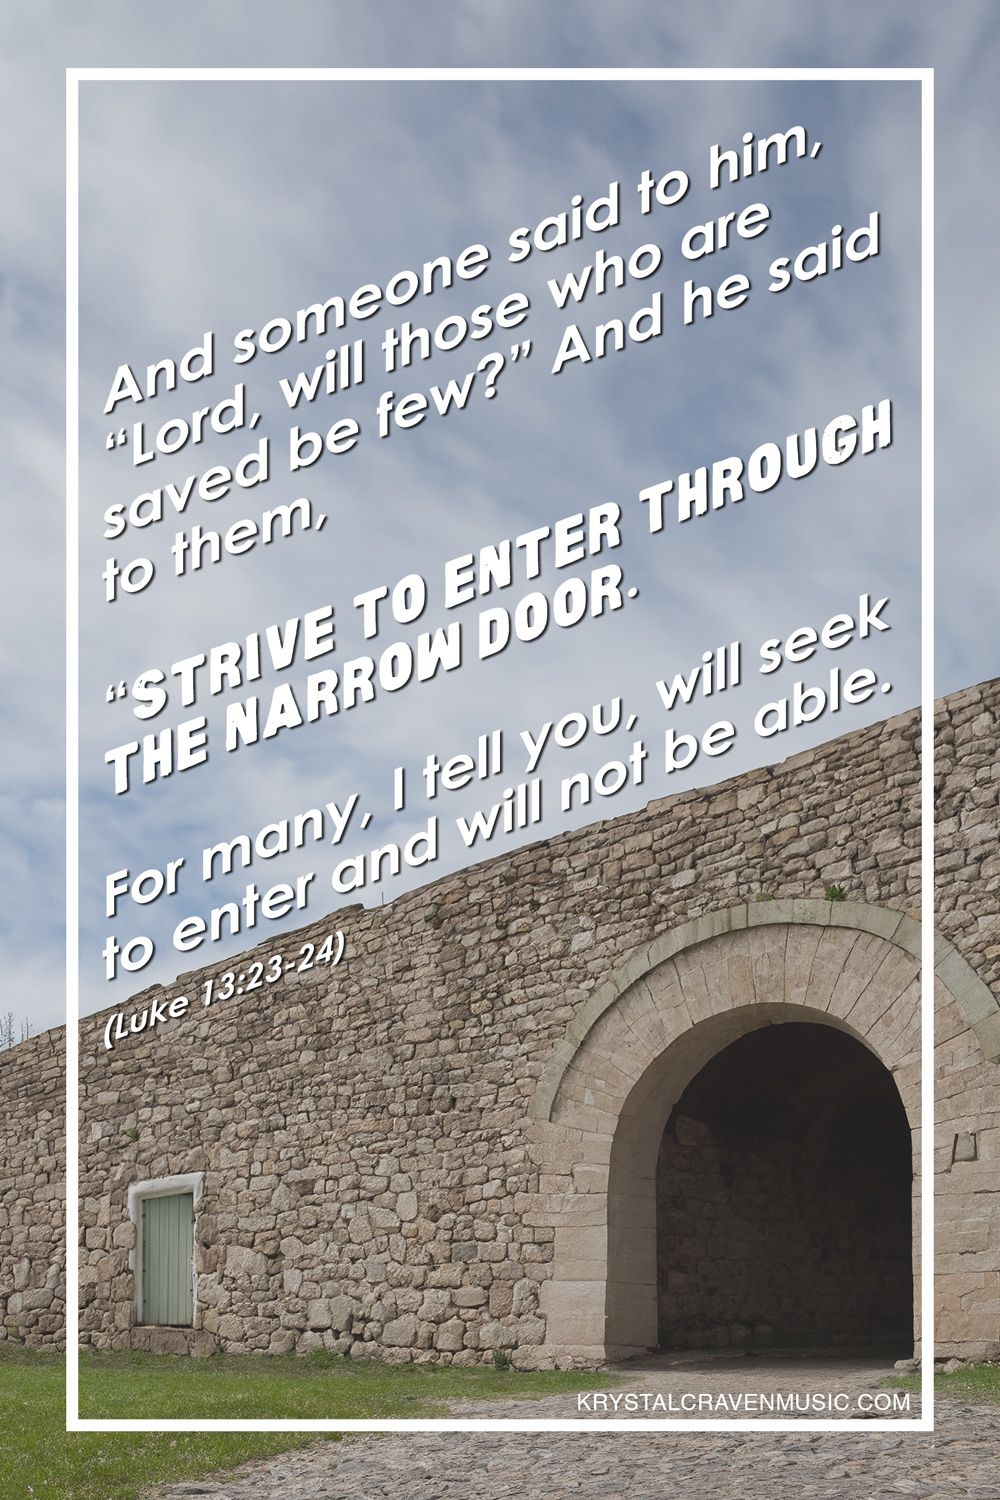 The text from Luke 13:23-24 "And someone said to him, “Lord, will those who are saved be few?” And he said to them, “Strive to enter through the narrow door. For many, I tell you, will seek to enter and will not be able." over a stone wall with an arched opening with a stone path leading into it.